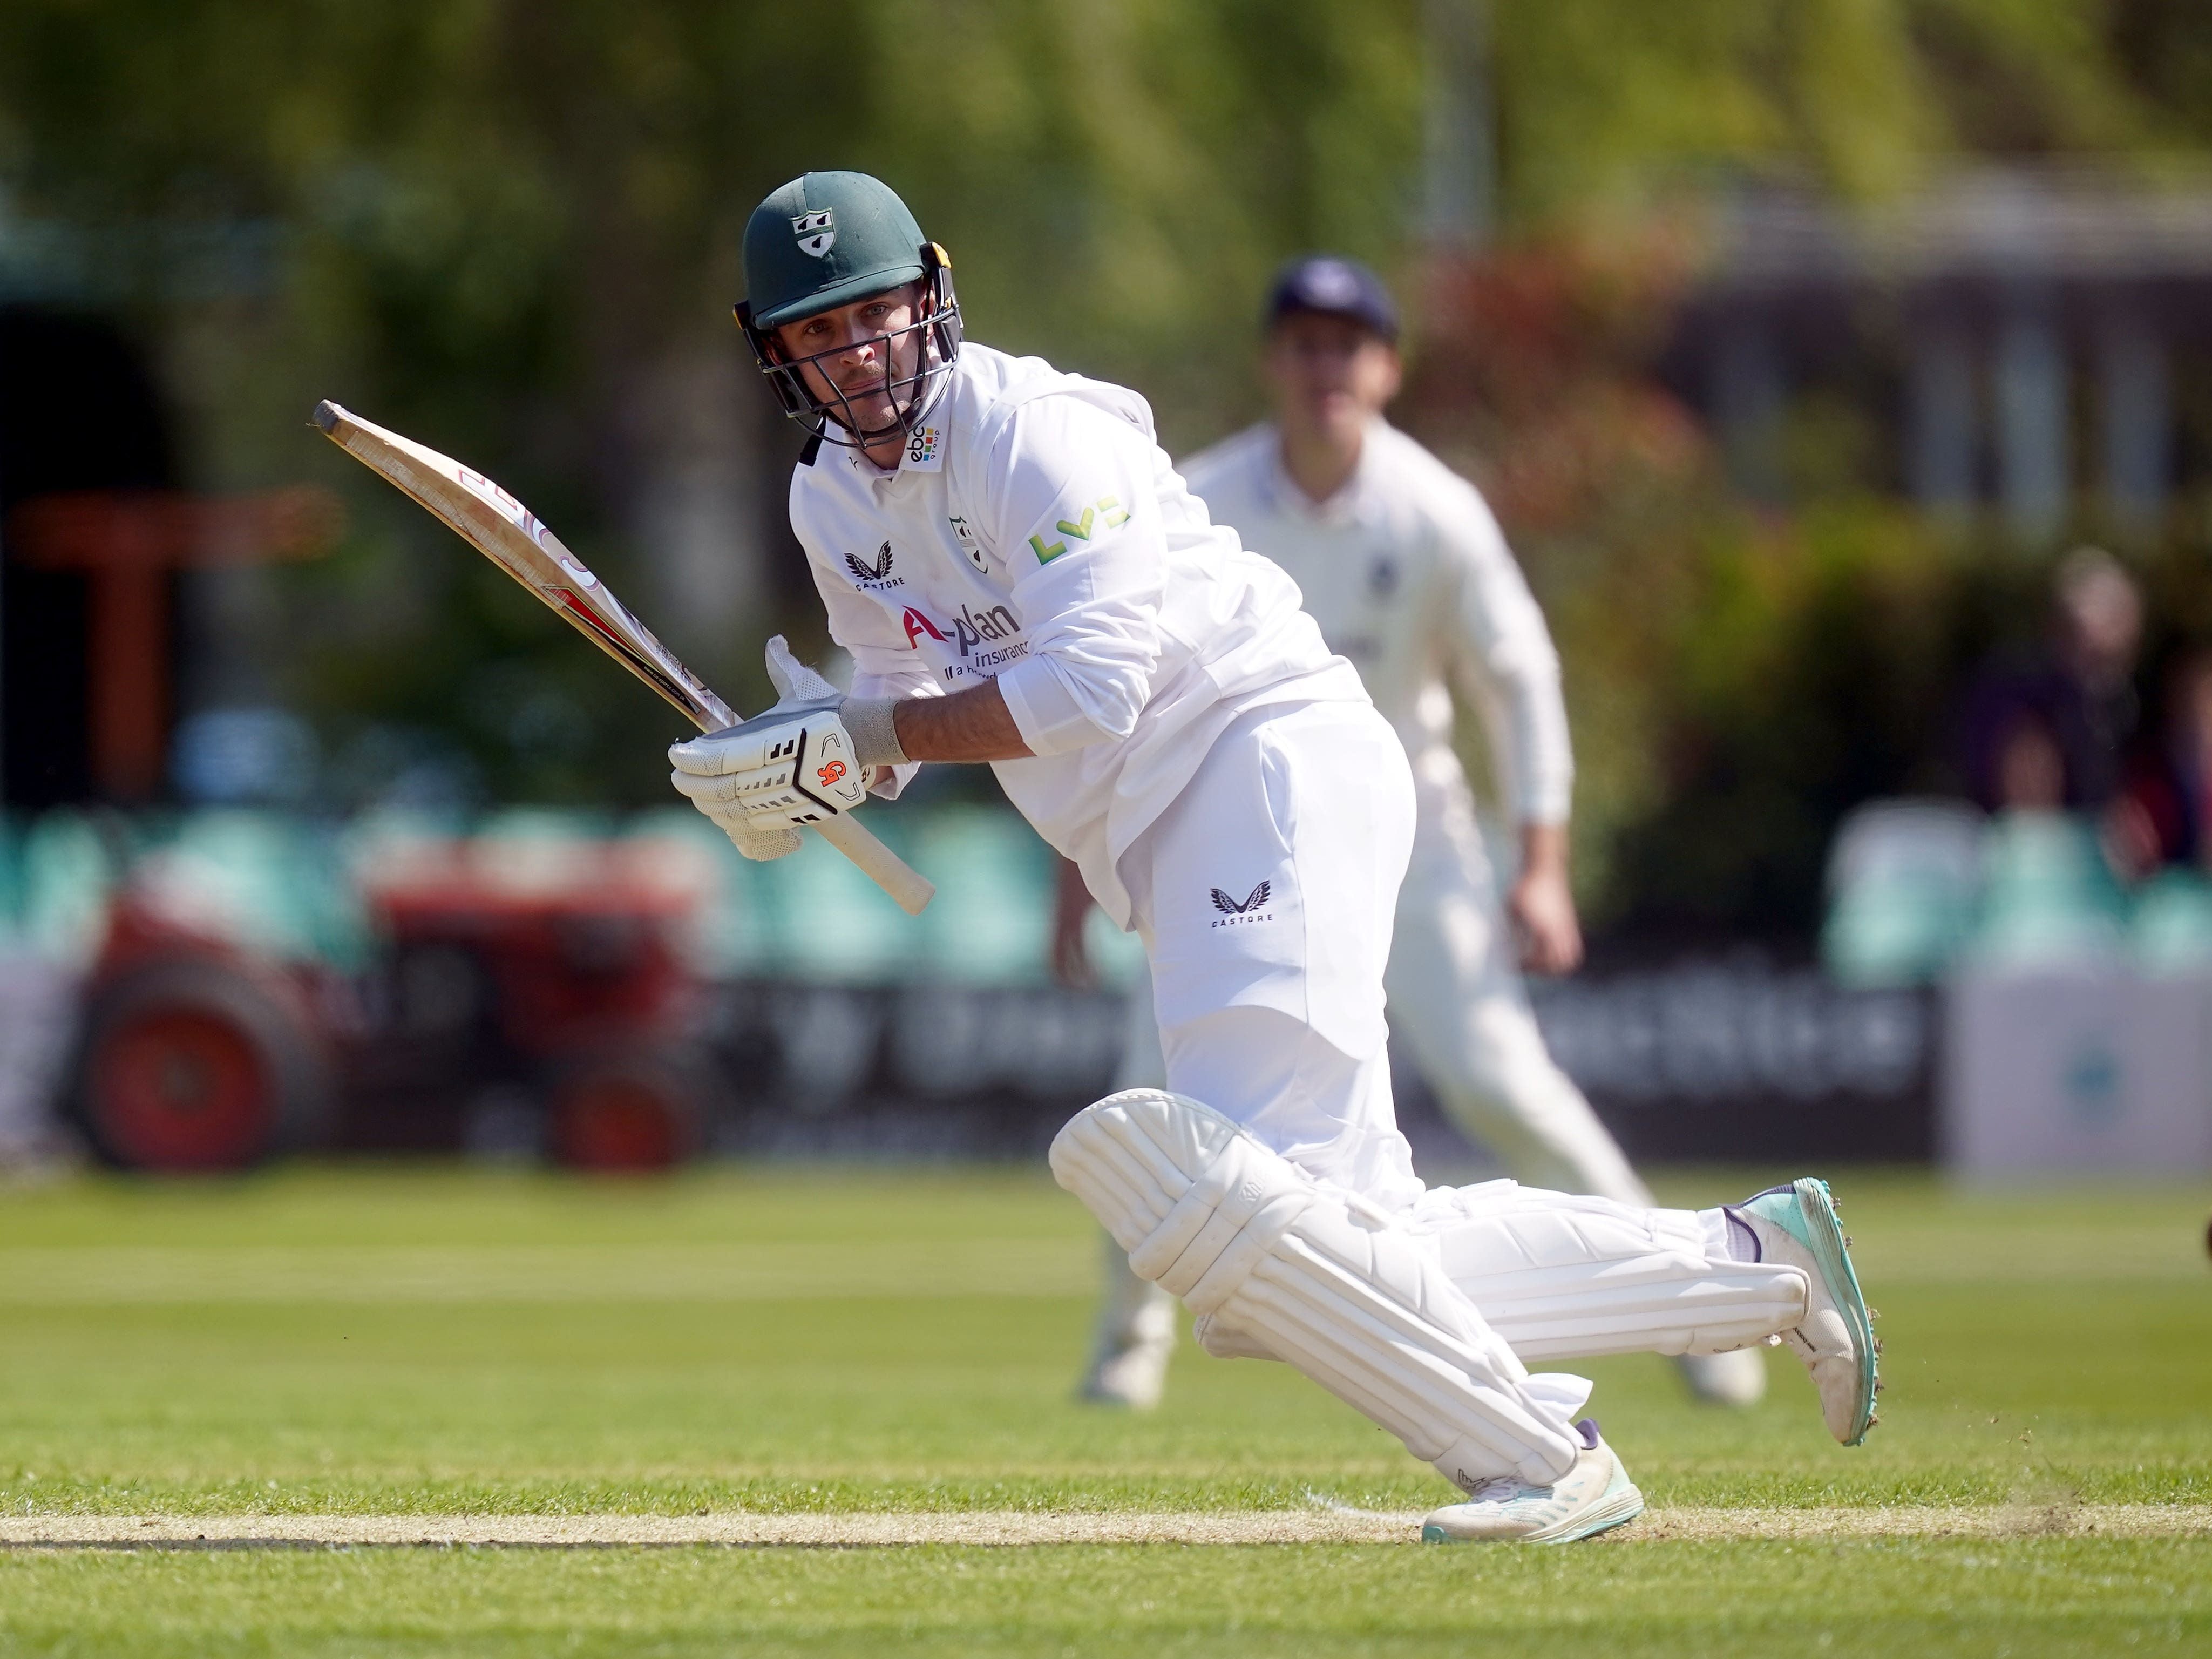 Vitality County Championship leaders Surrey on top against Worcestershire